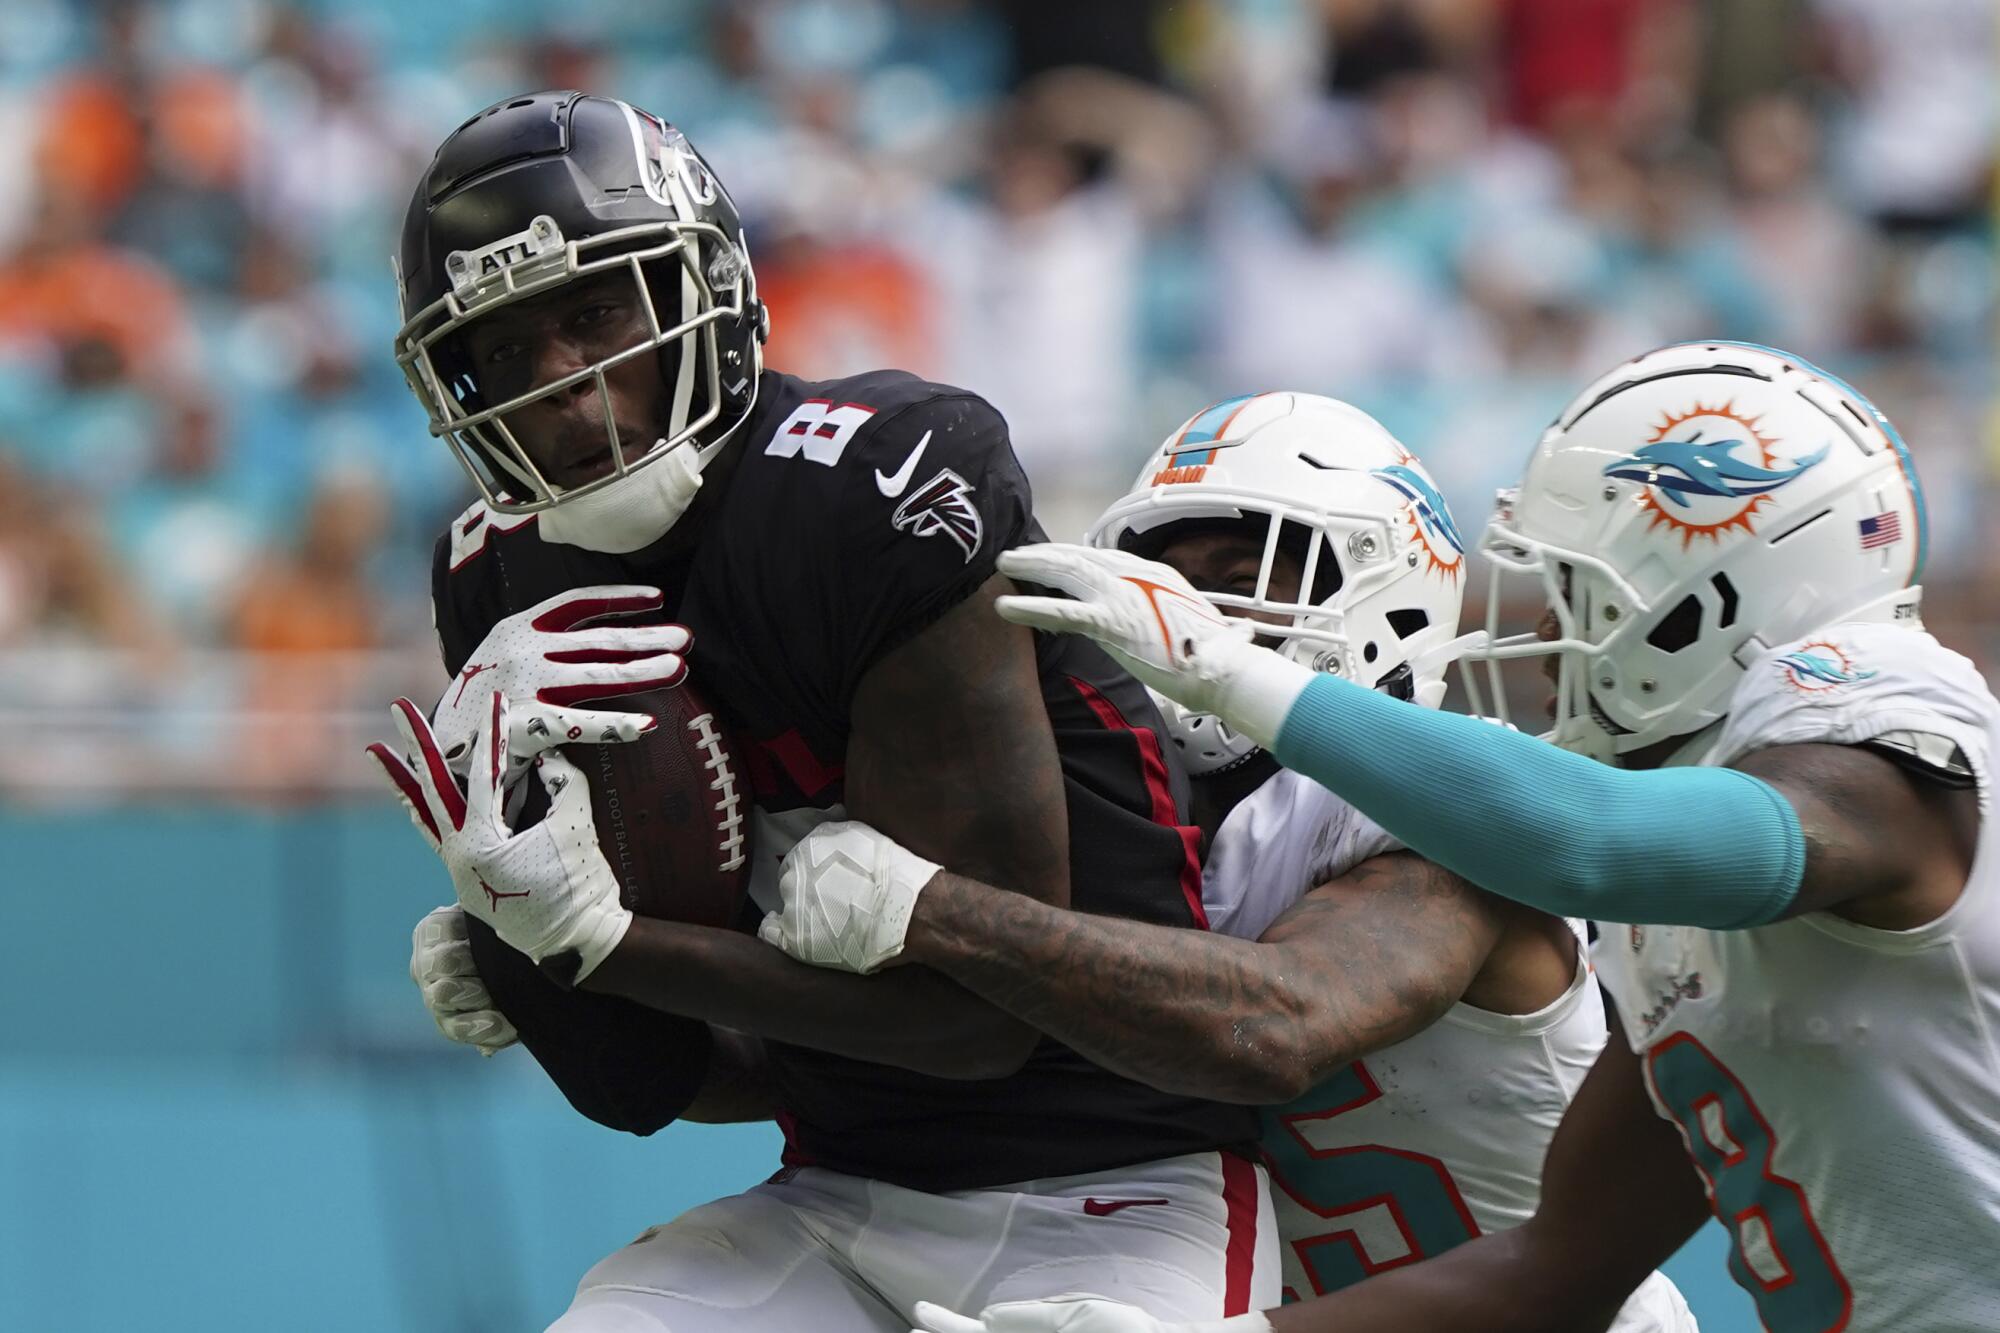 Atlanta Falcons tight end Kyle Pitts makes a catch while defended by Miami Dolphins defenders.